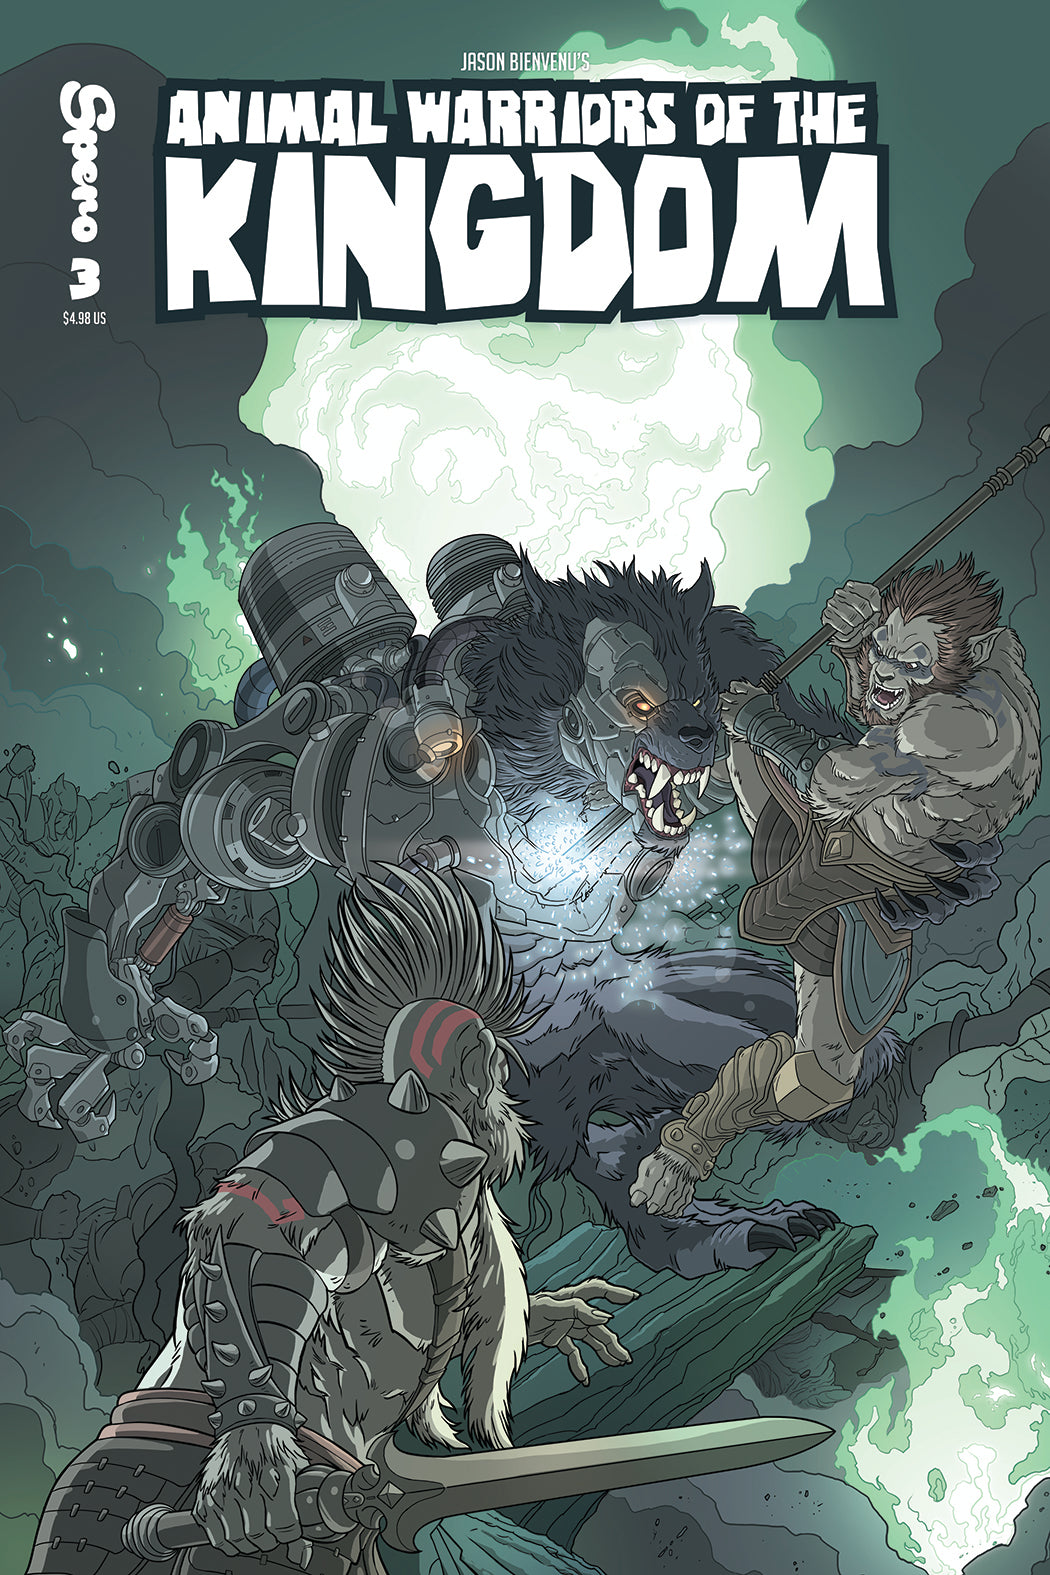 ANIMAL WARRIORS OF THE KINGDOM ISSUE #3 -Physical Copy